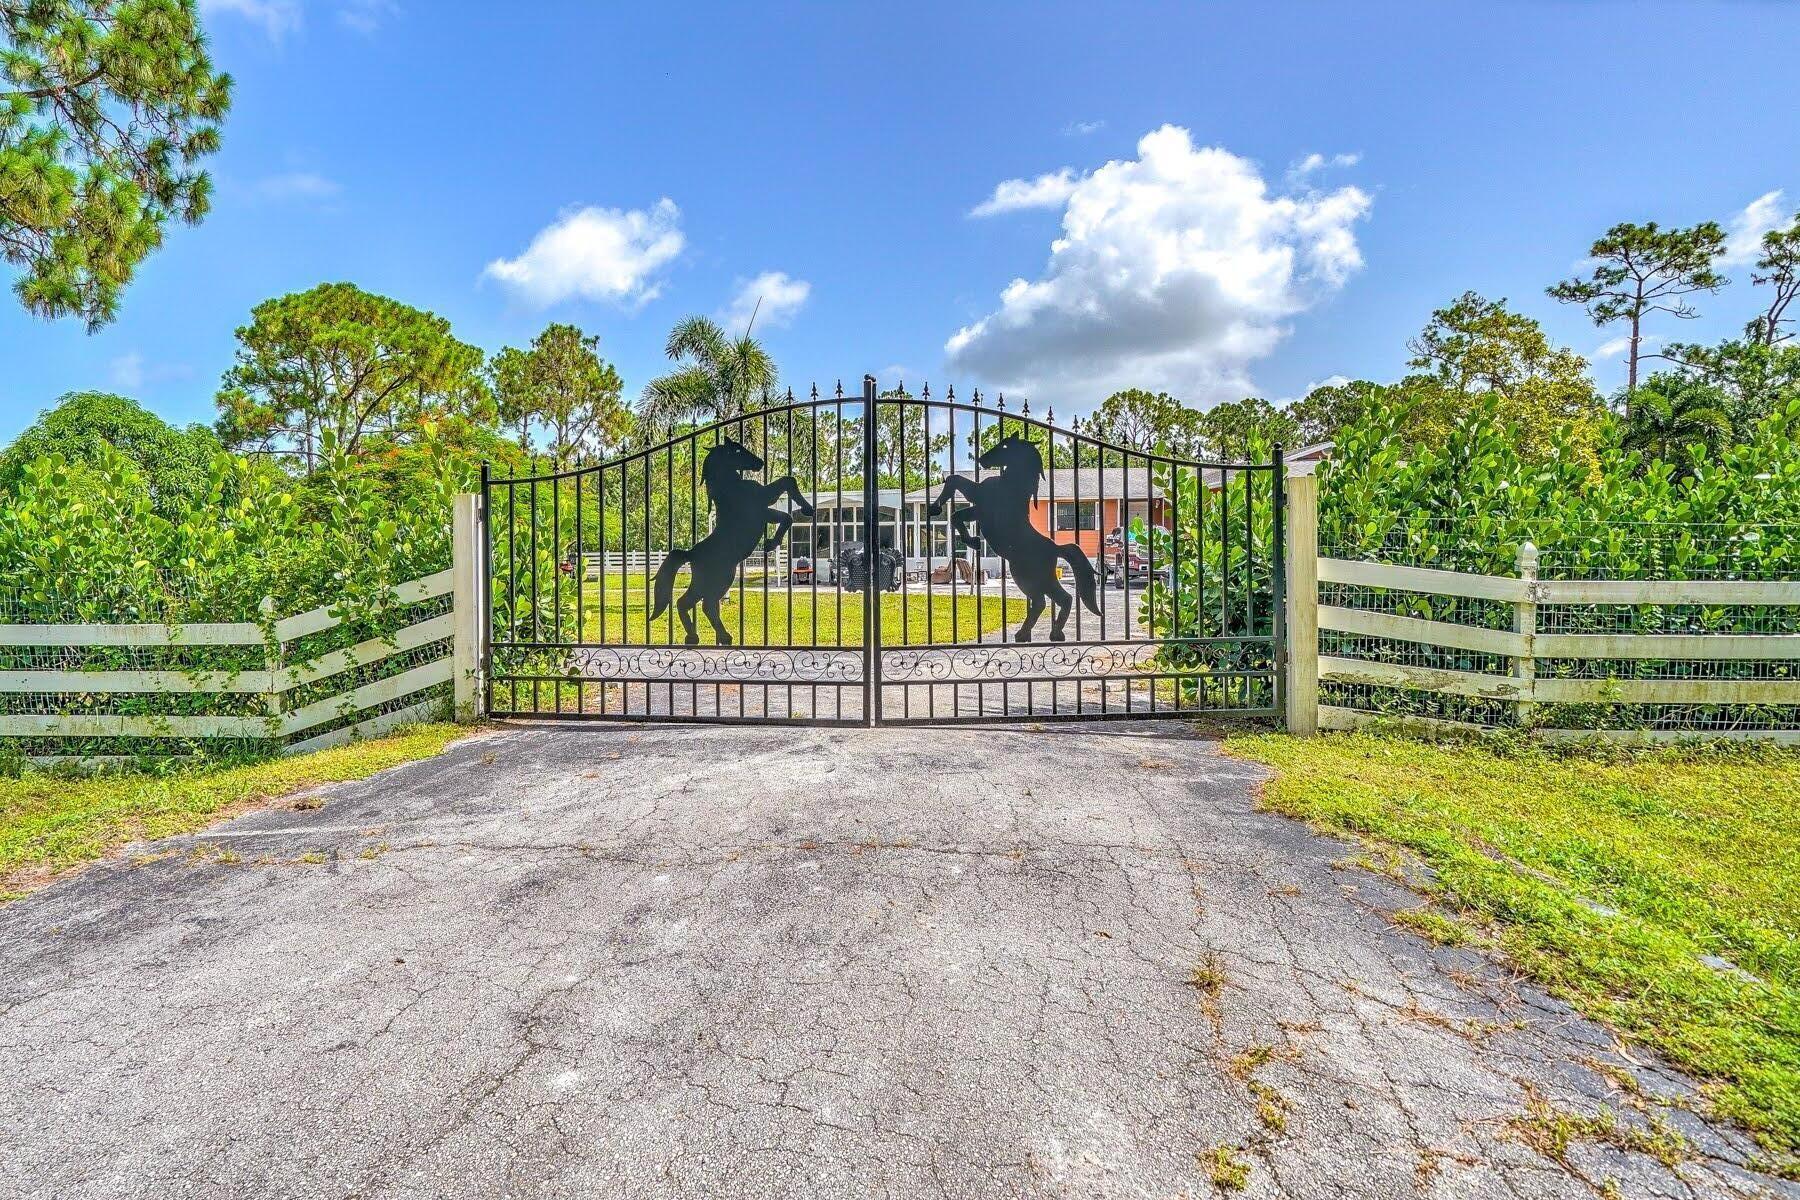 ***PRICE REDUCED FOR FAST SALE*** 4-Bed, 2-Bath Home on Over 1 Acre in Loxahatchee This stunning 4-bed, 2-bath single-family home is a true equestrian paradise in the heart of Loxahatchee. Nestled on over 1 acre of picturesque land, this property offers a unique blend of modern luxury and timeless equestrian charm. Step inside to find a meticulously maintained andFULLY RENOVATED residence. Over 100,000 in renovations Every room showcases impeccable craftsmanship and high-end finishes, providing an inviting and comfortable atmosphere for you and your family. The heart of this home is the spacious social area, ideal for seamless entertaining and family gatherings. The gourmet kitchen boasts top-of-the-line appliances, ample counter space, and an expansive island, making it a chef's delight.